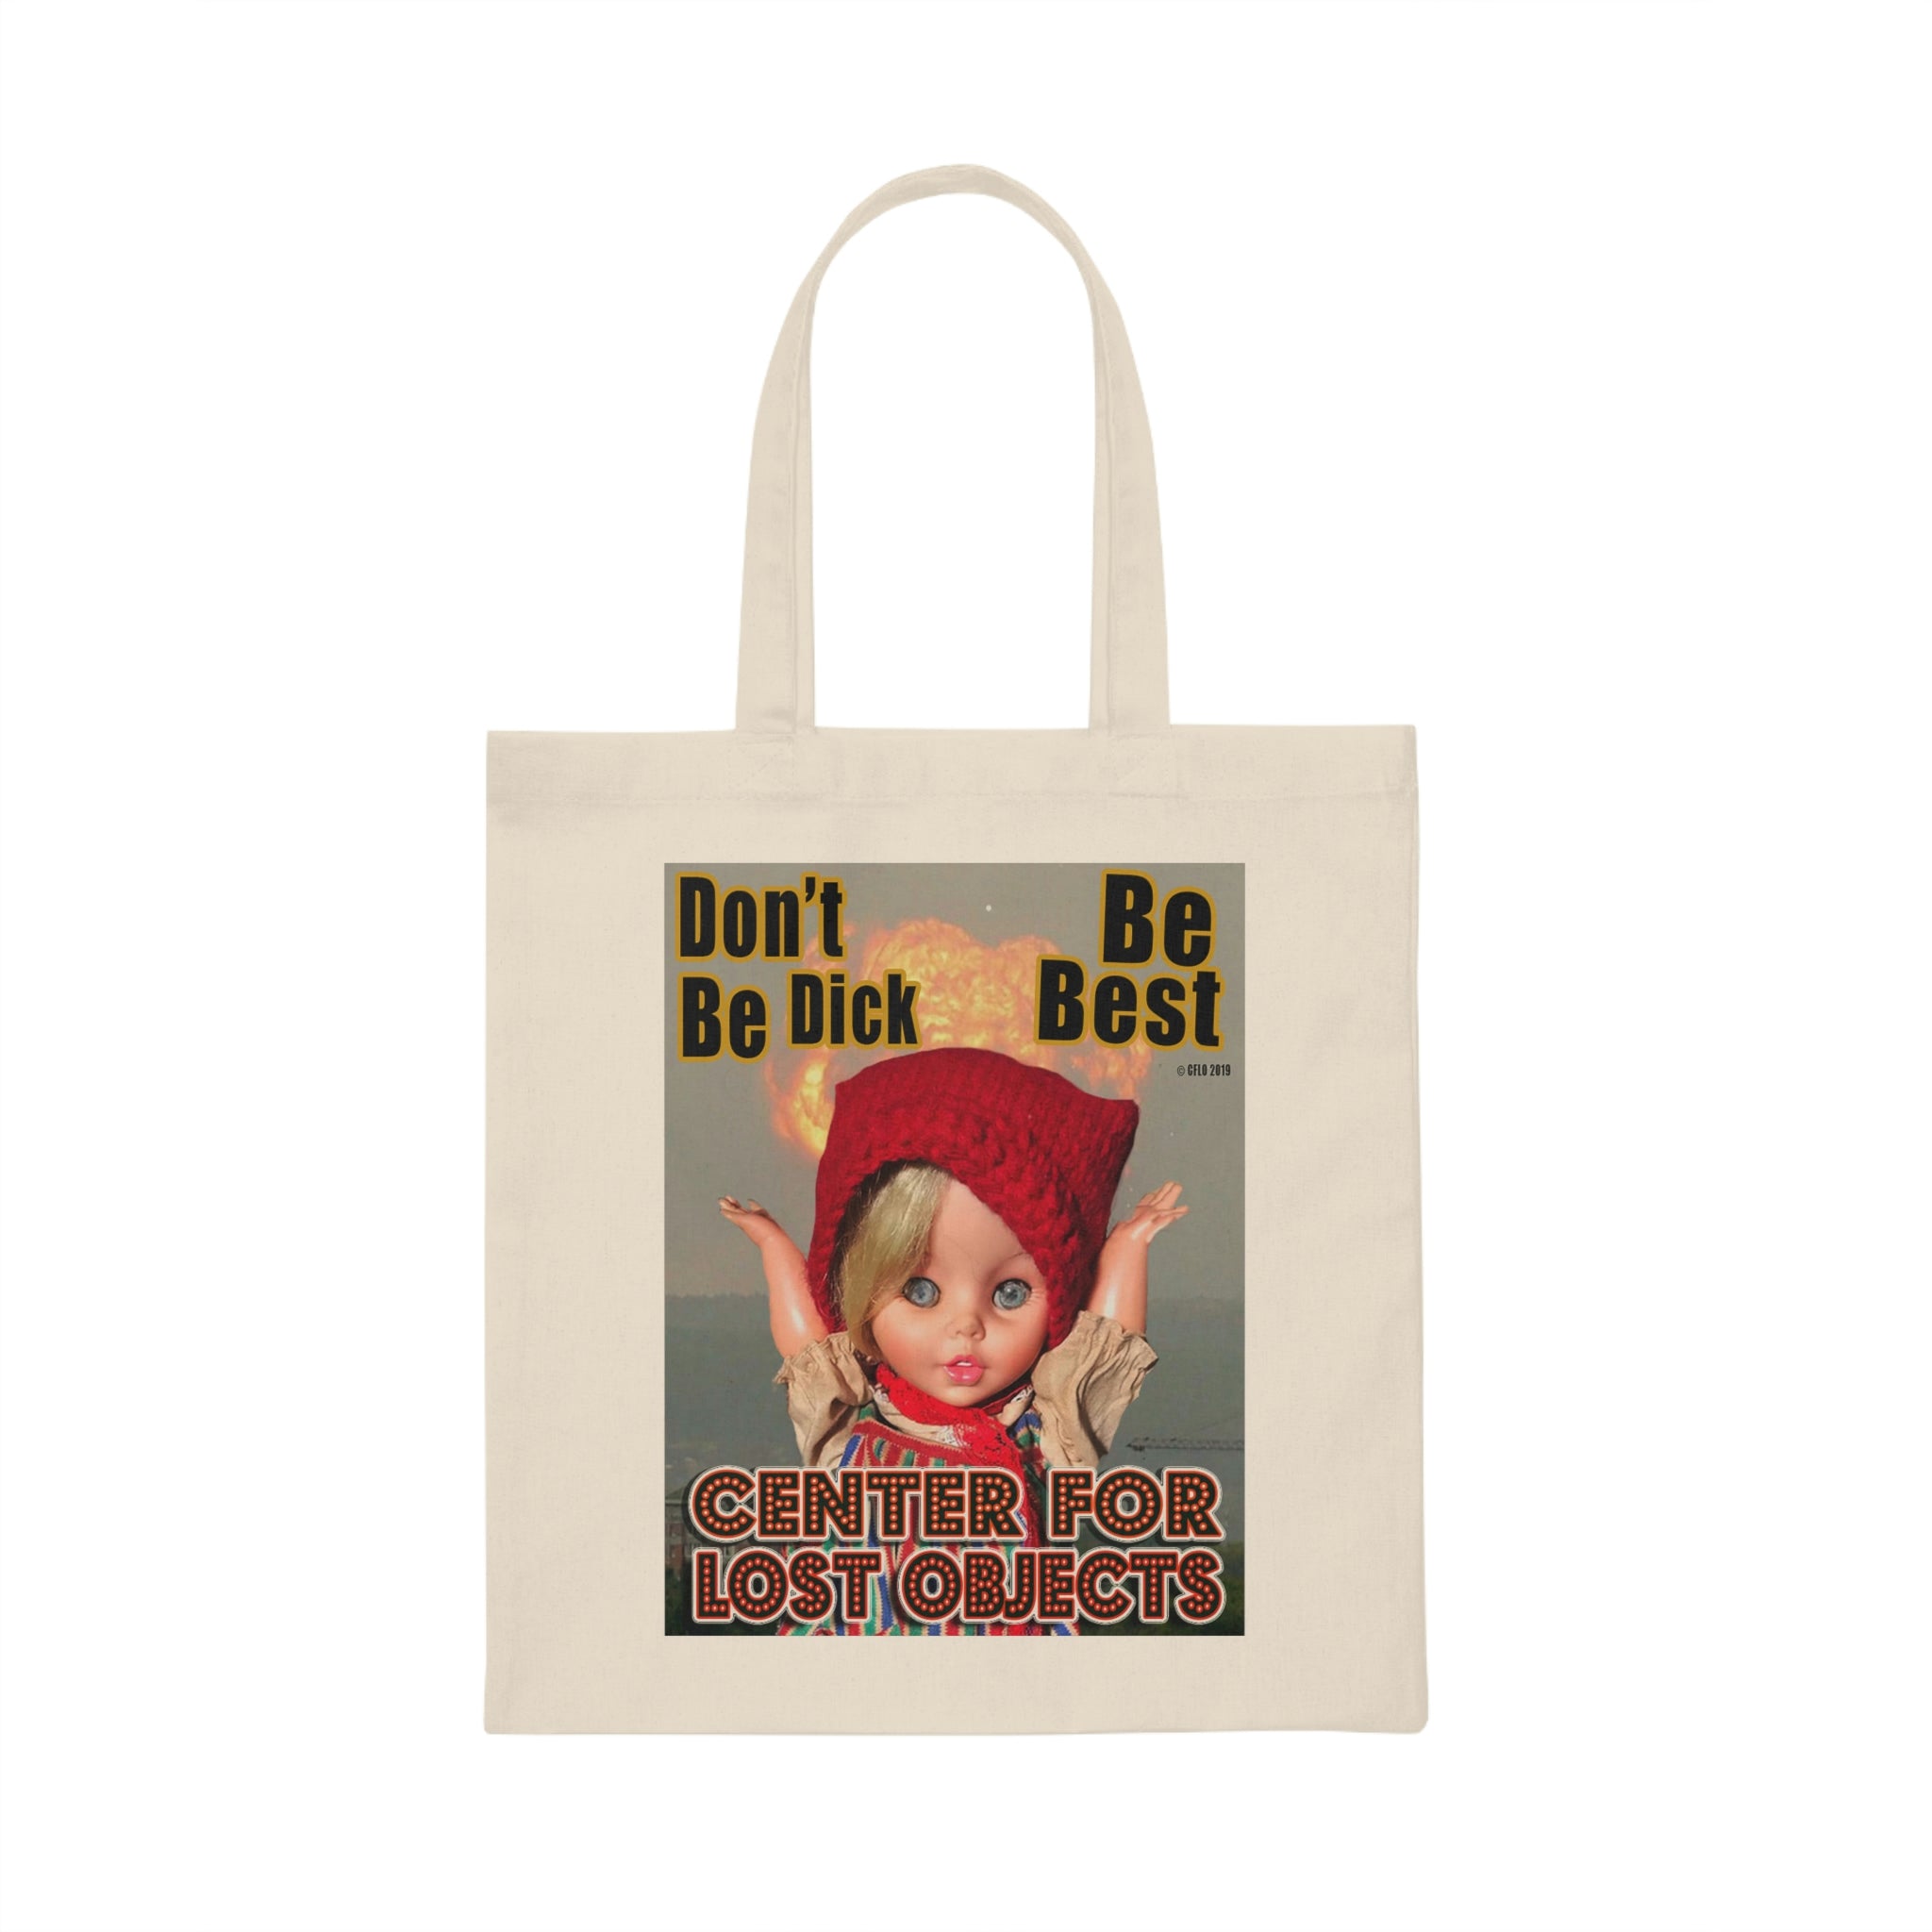 CFLO "Don't Be Dick  Be Best"Canvas Tote Bag